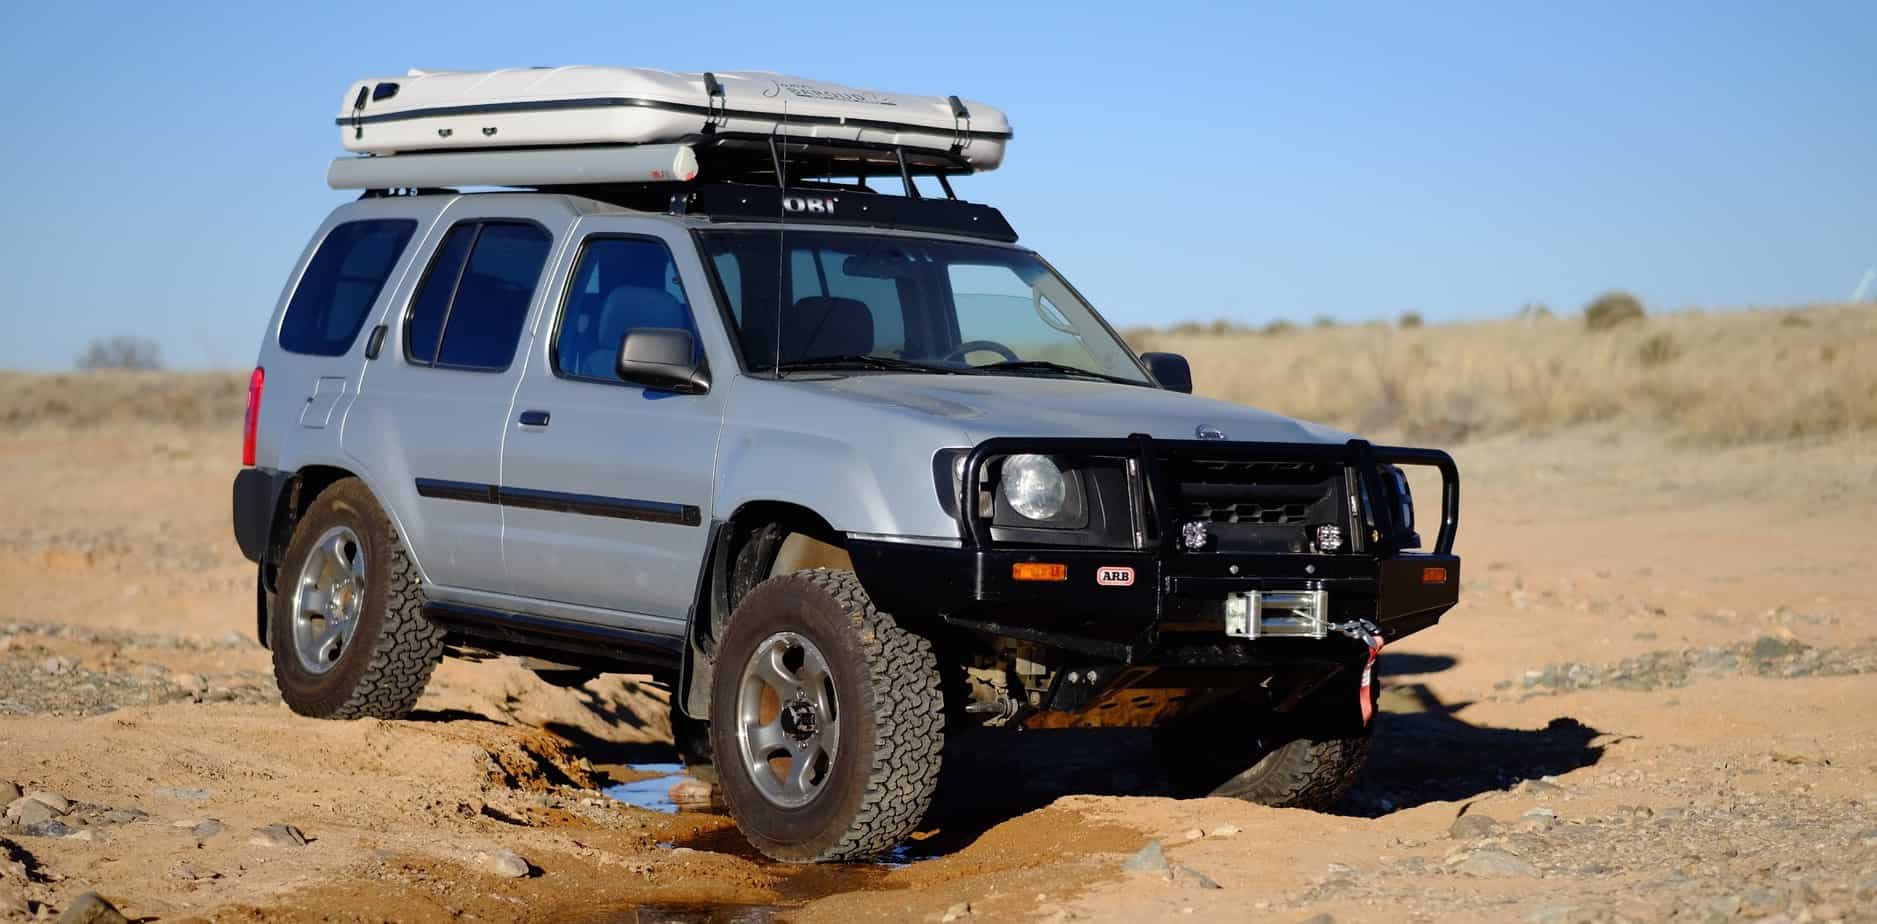 Featured Vehicle: 2003 Nissan Xterra - Expedition Portal